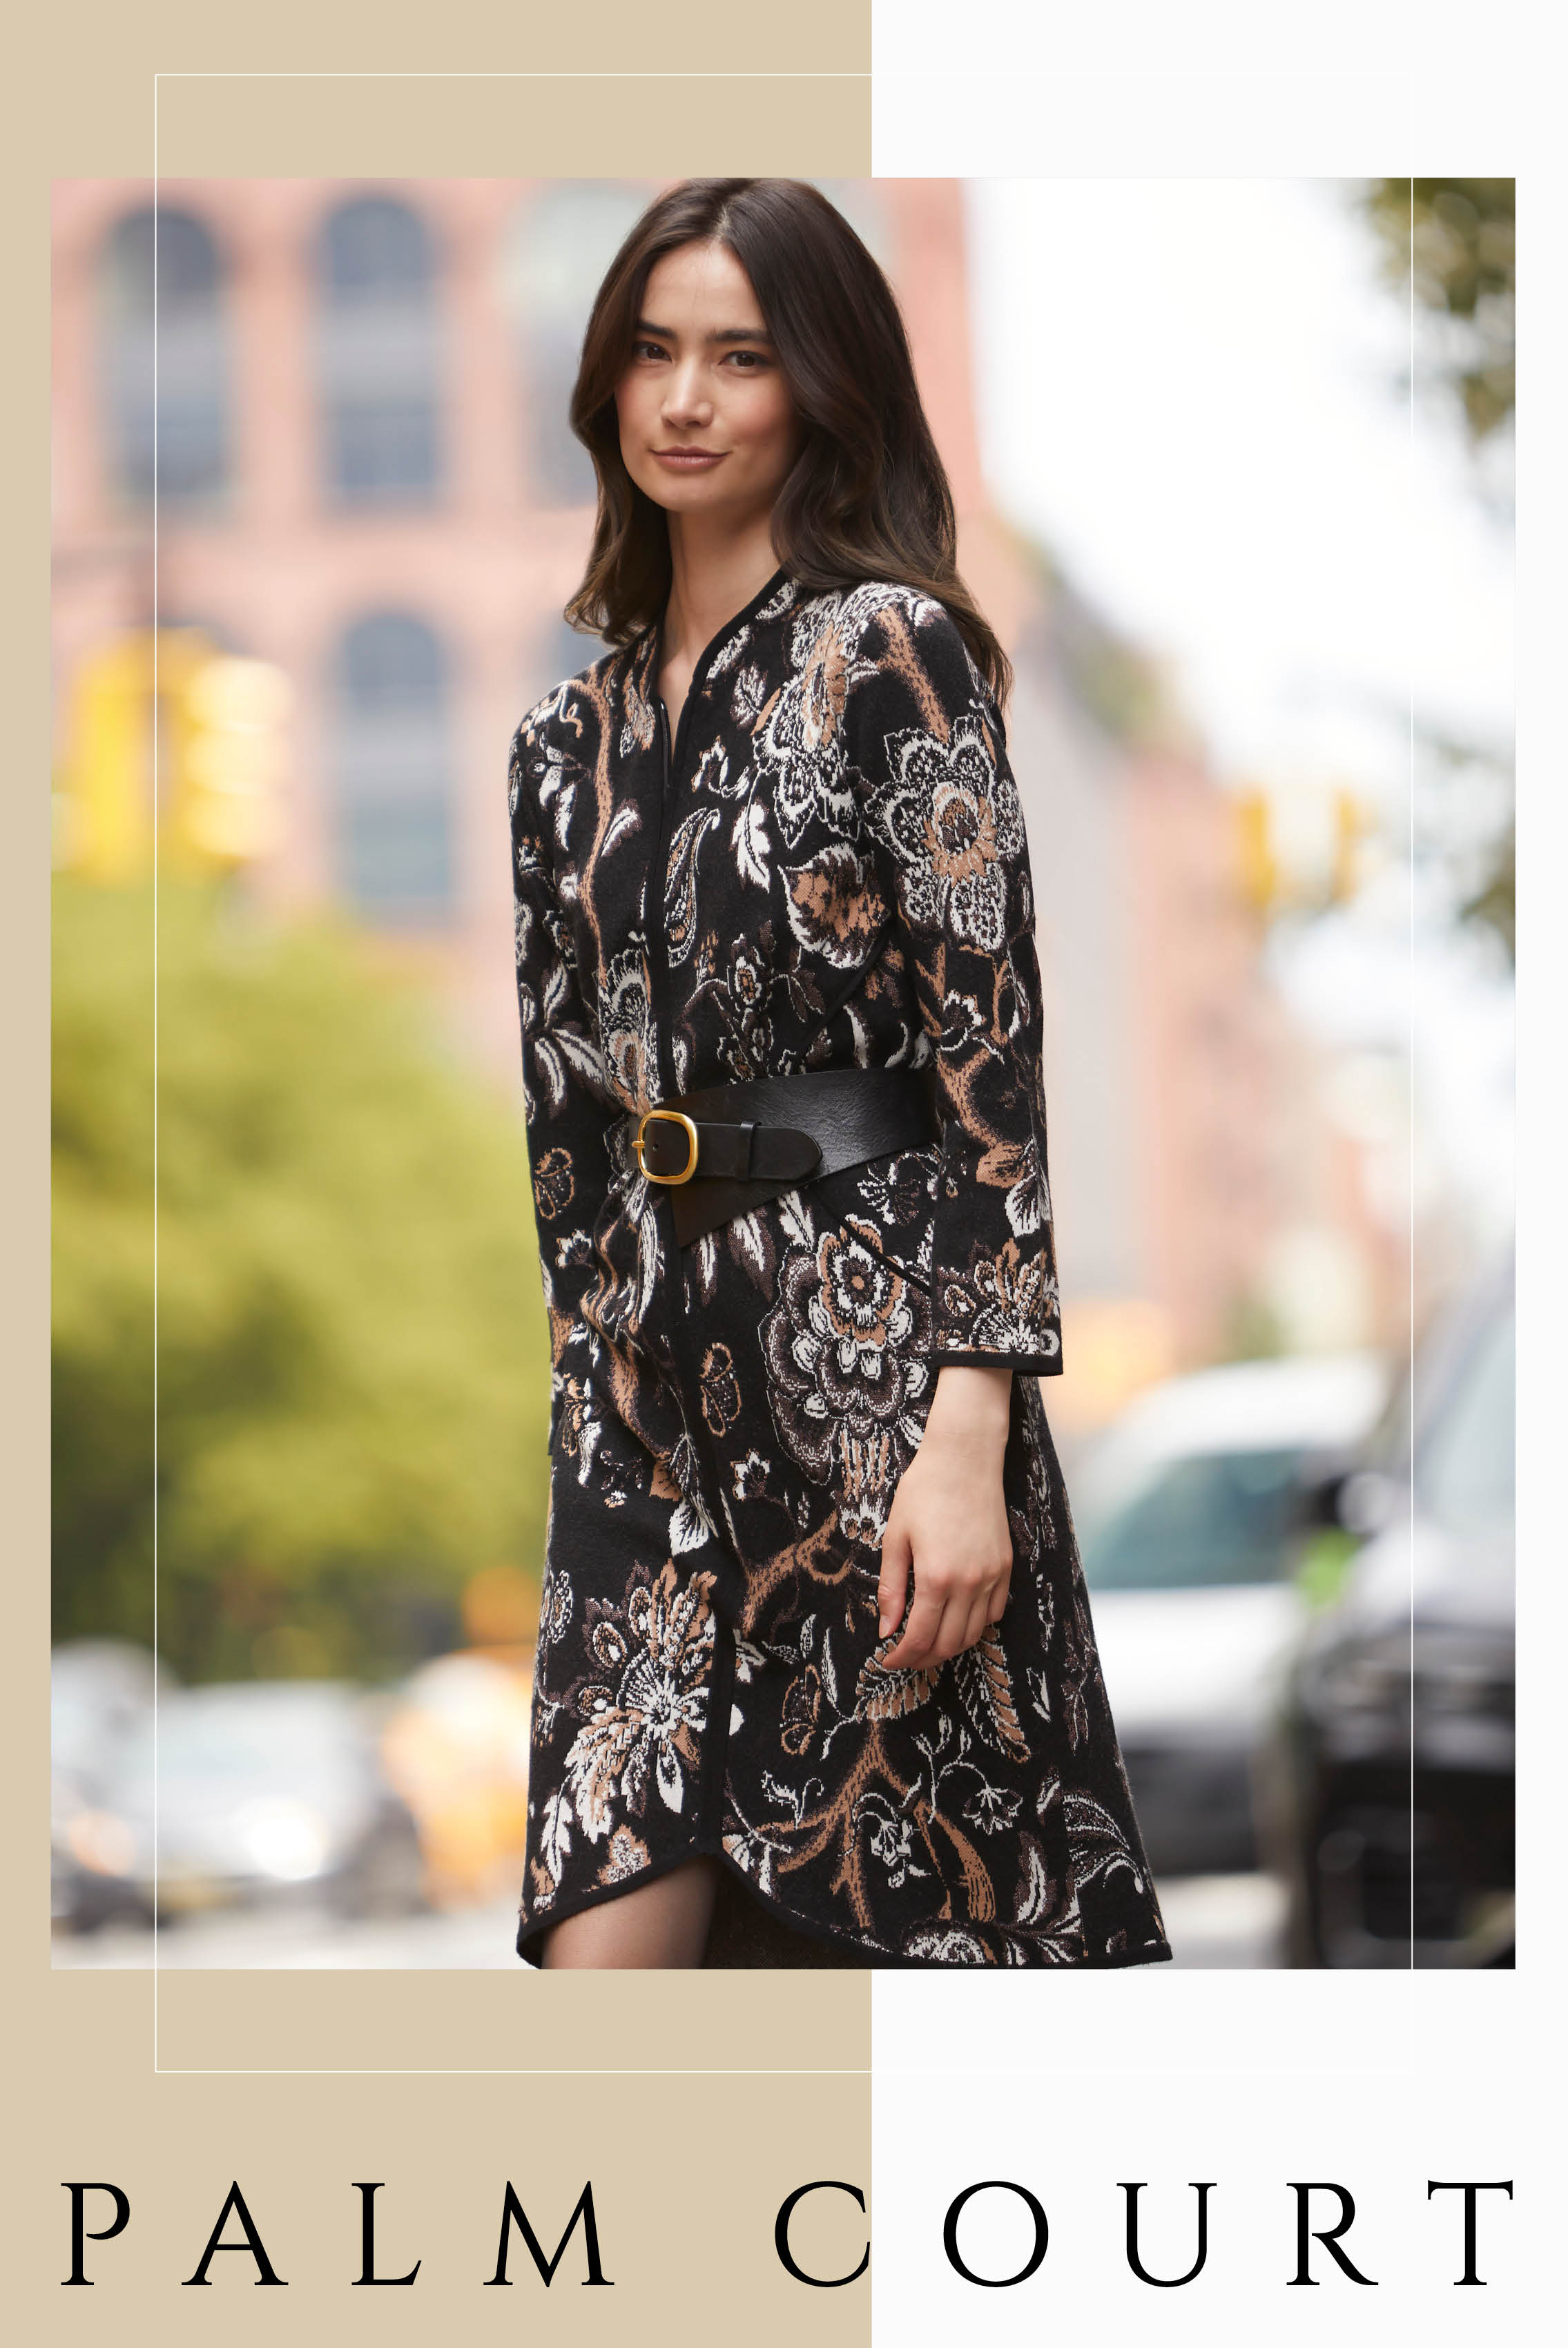 The knit sheath dress of the season is a birdseye jacquard with metallic threads that sparkle with opulent splendor. Fanciful branches, flowers and leaves create a holiday wonderland to inspire fellow party guests.